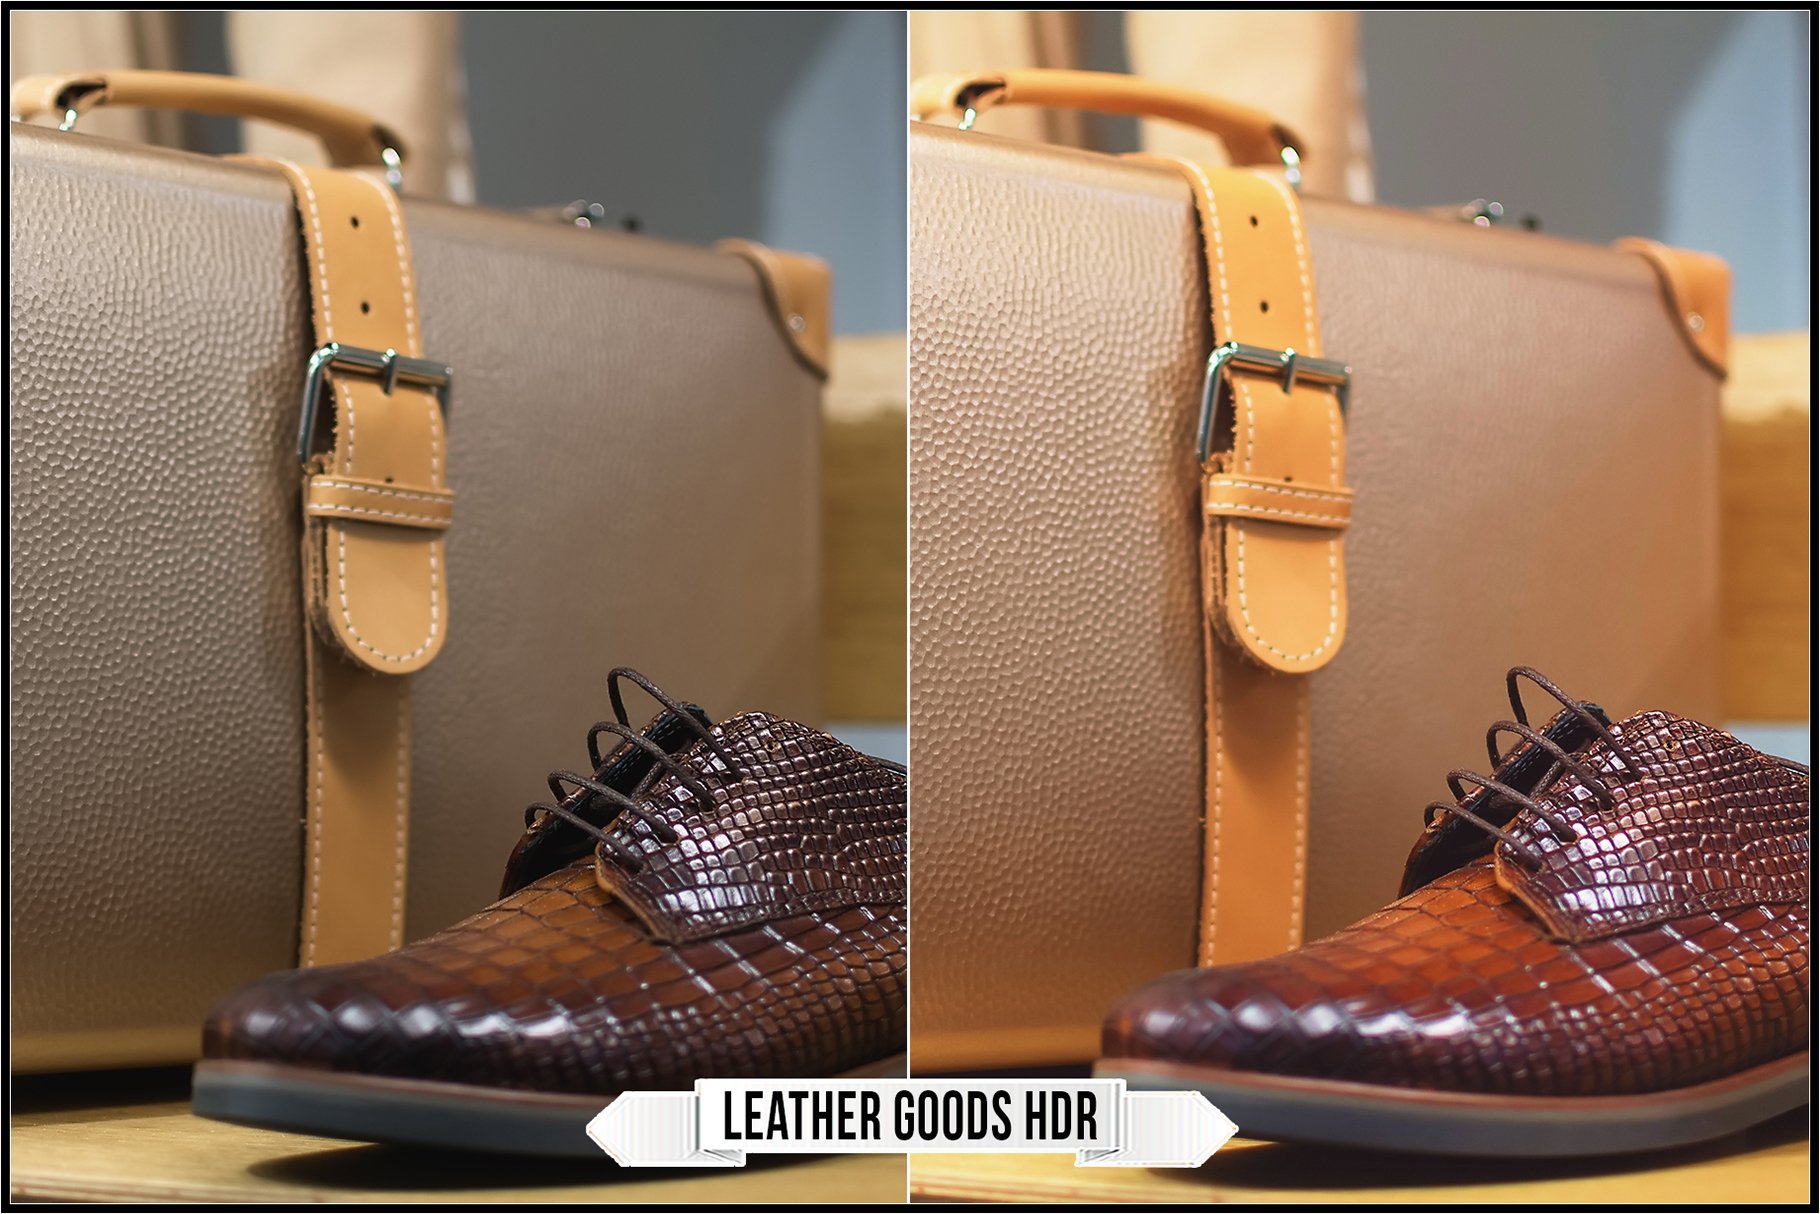 leather goods hdr 771